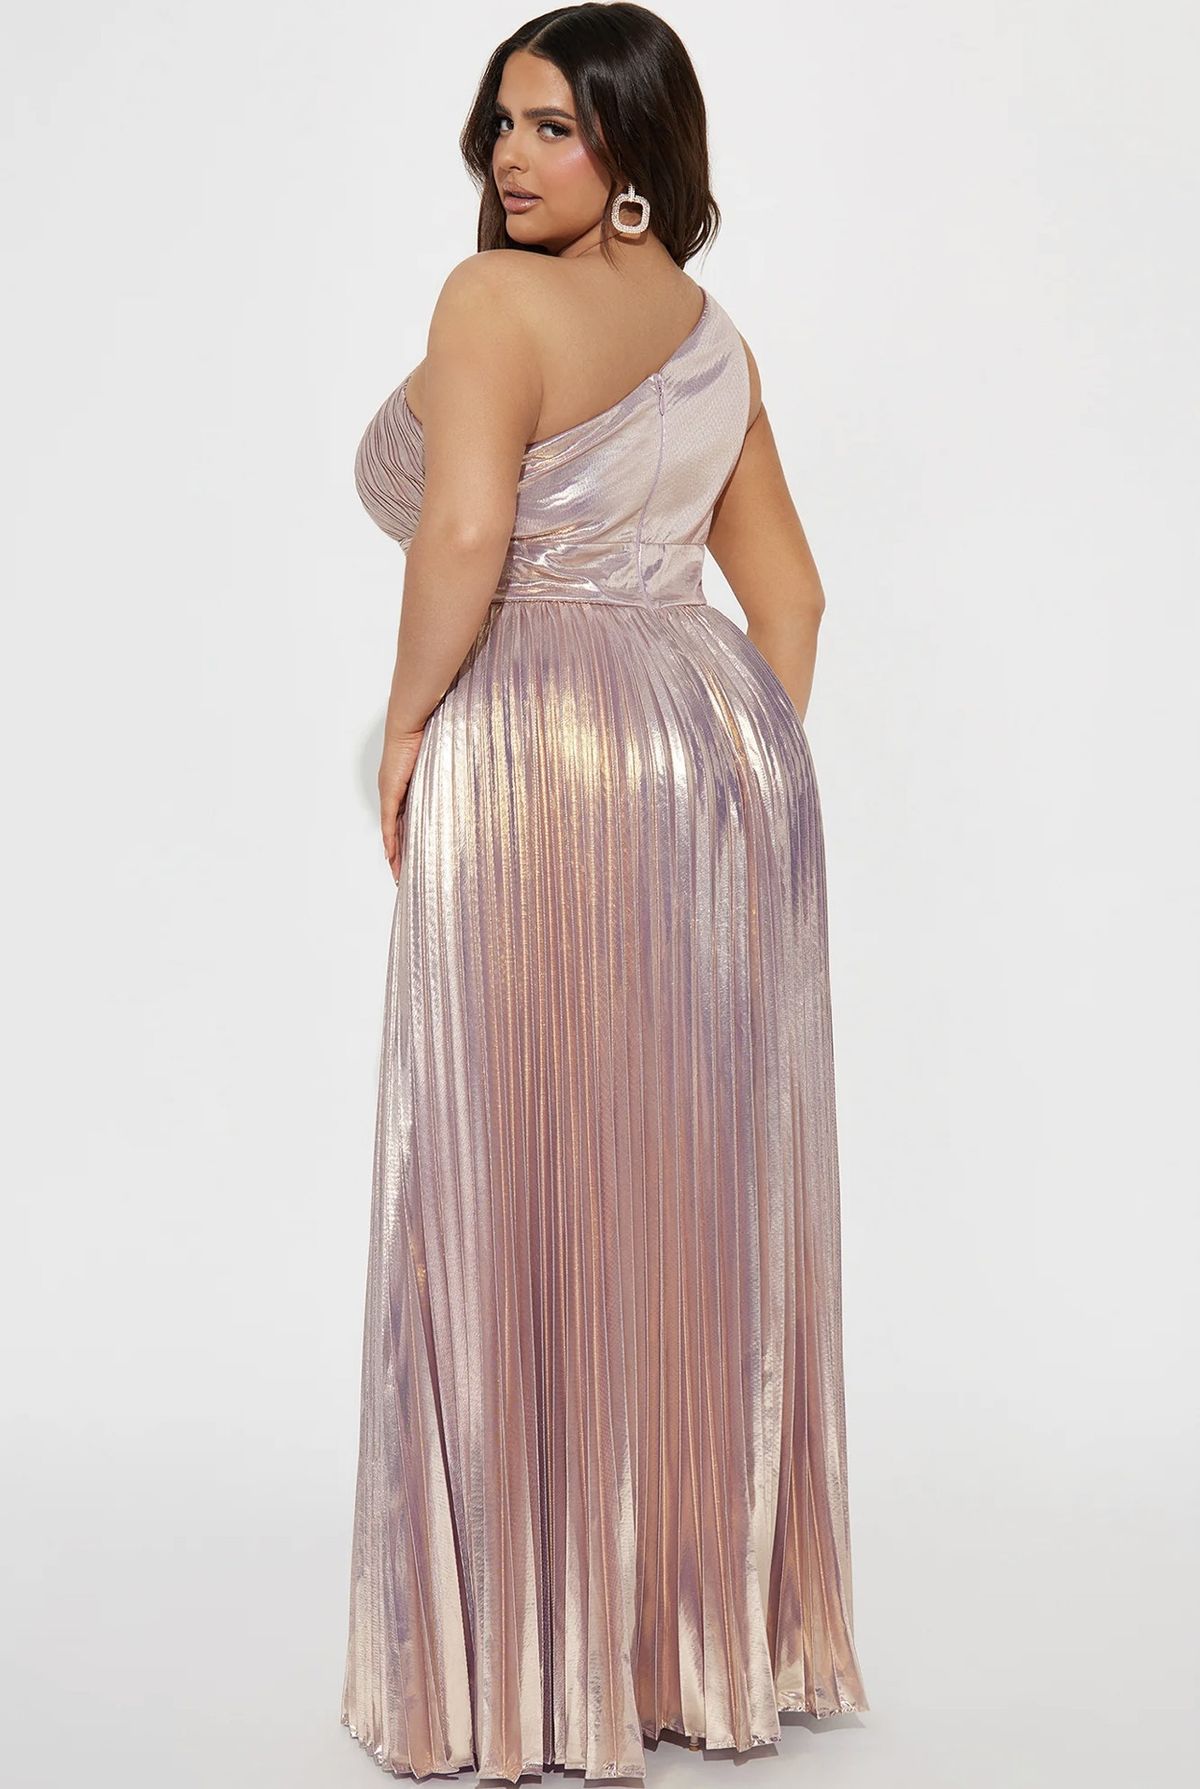 Plus Size 24 Prom One Shoulder Multicolor A-line Dress on Queenly